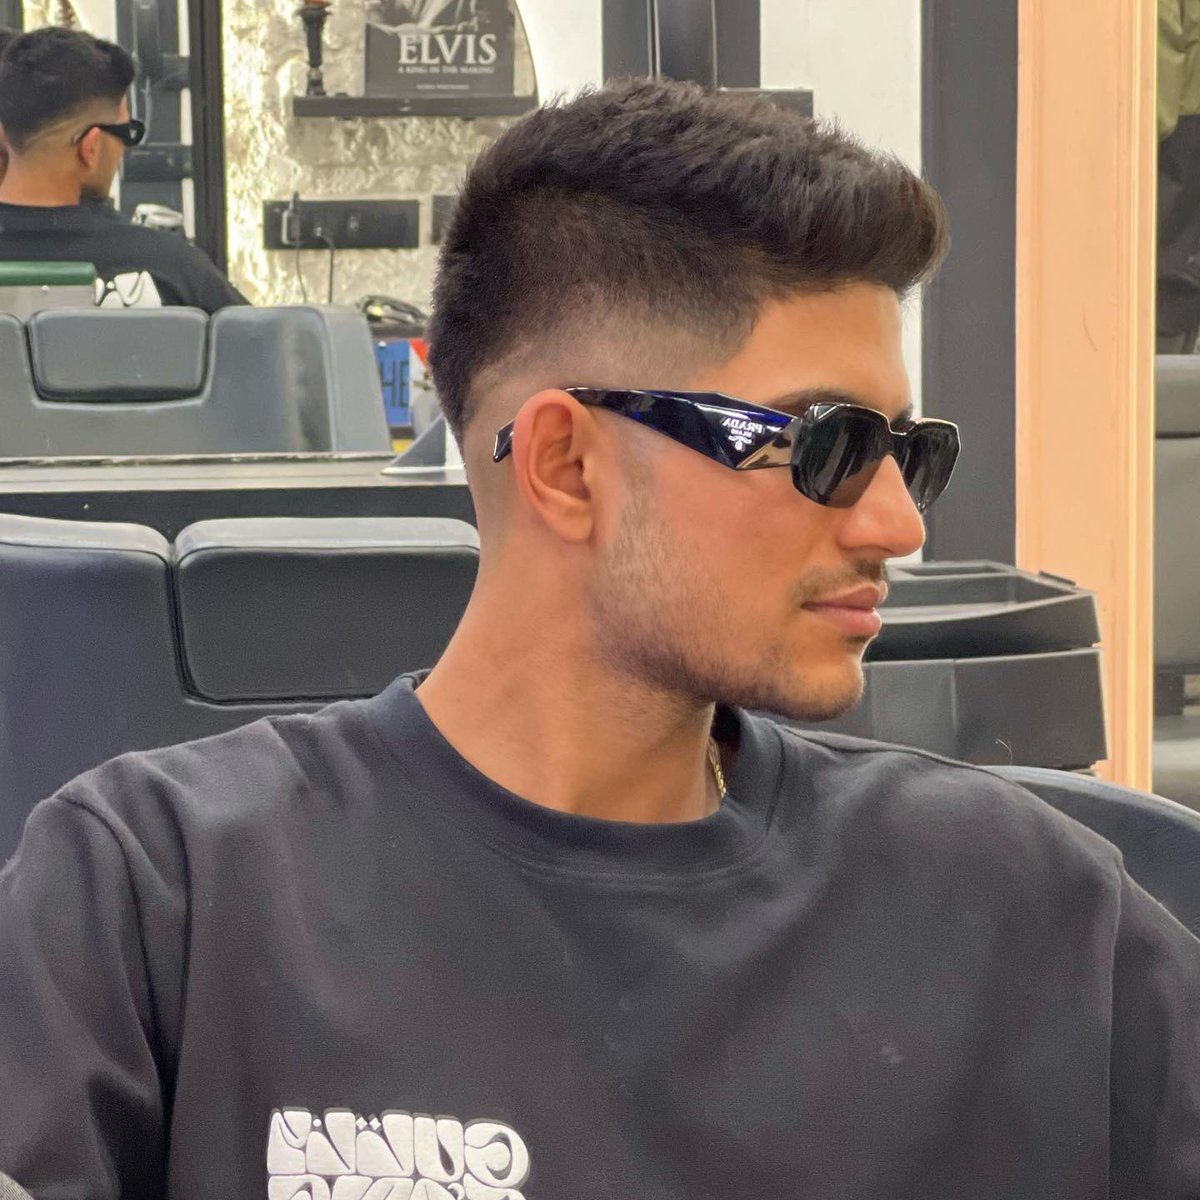 Boom 💥

And My Last Haircut Of The Year 2022 For Our Rockstar @ShubmanGill 🏏🔥🚀

#shubmangill #shubmangilllovers #shubman #aalimhakim #lasthaircut0f2022 #hakimsaalim #freshhaircut #fade #texture #indiancricketer #cricketstar #youthicon #indian #rockstar #shubmangillfanclub